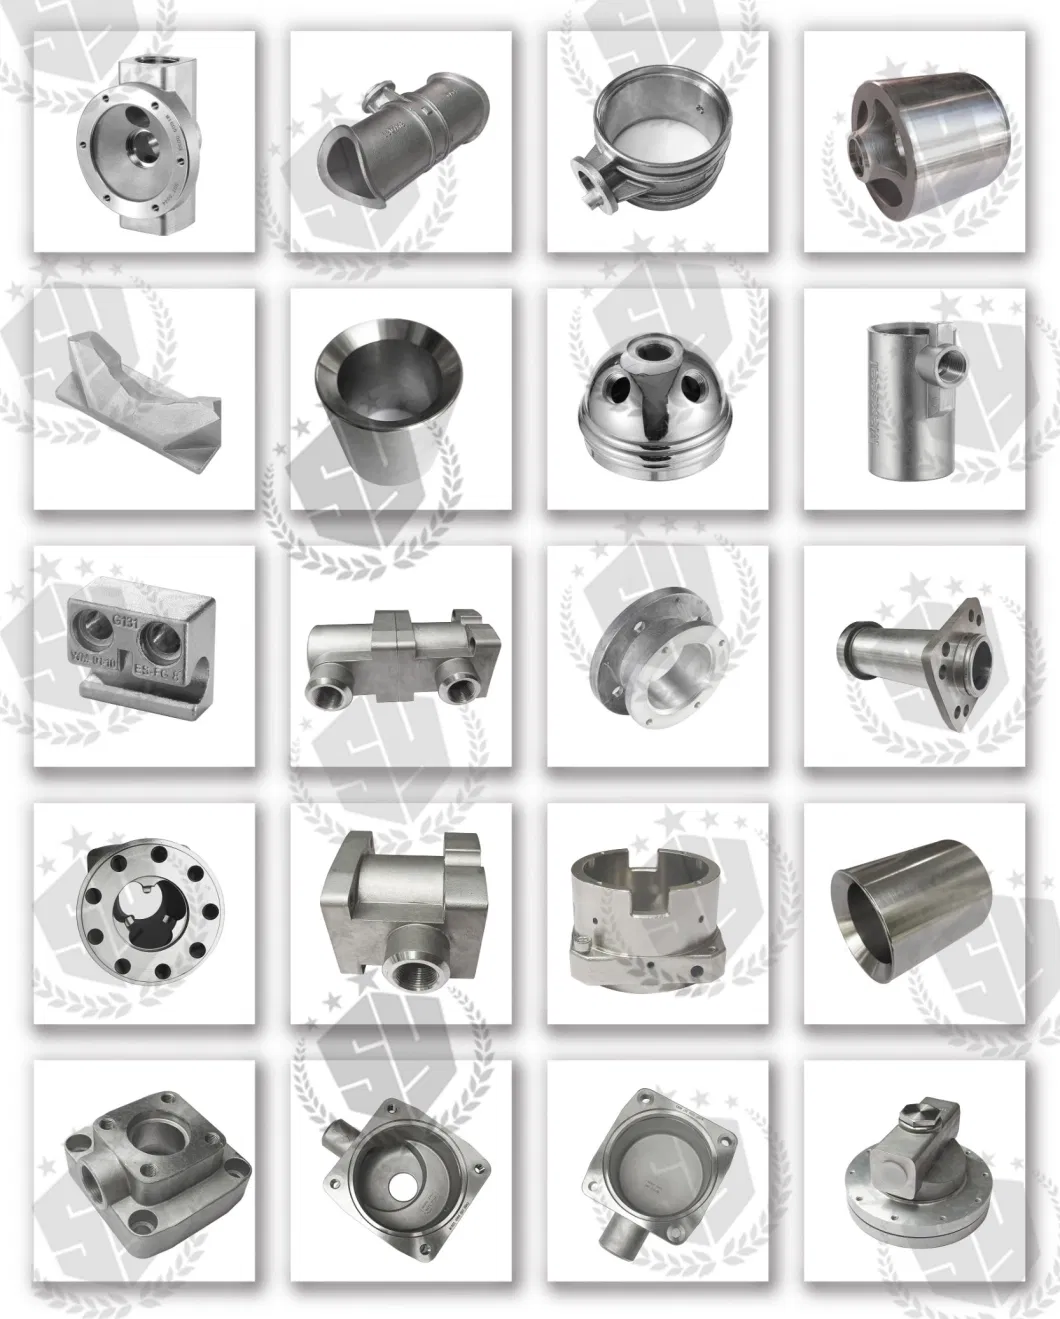 Machinery Alumalloy Metal Casting Company Customized High Pressure Stainless Steel Investment Casting Services China Professional Steel Casting